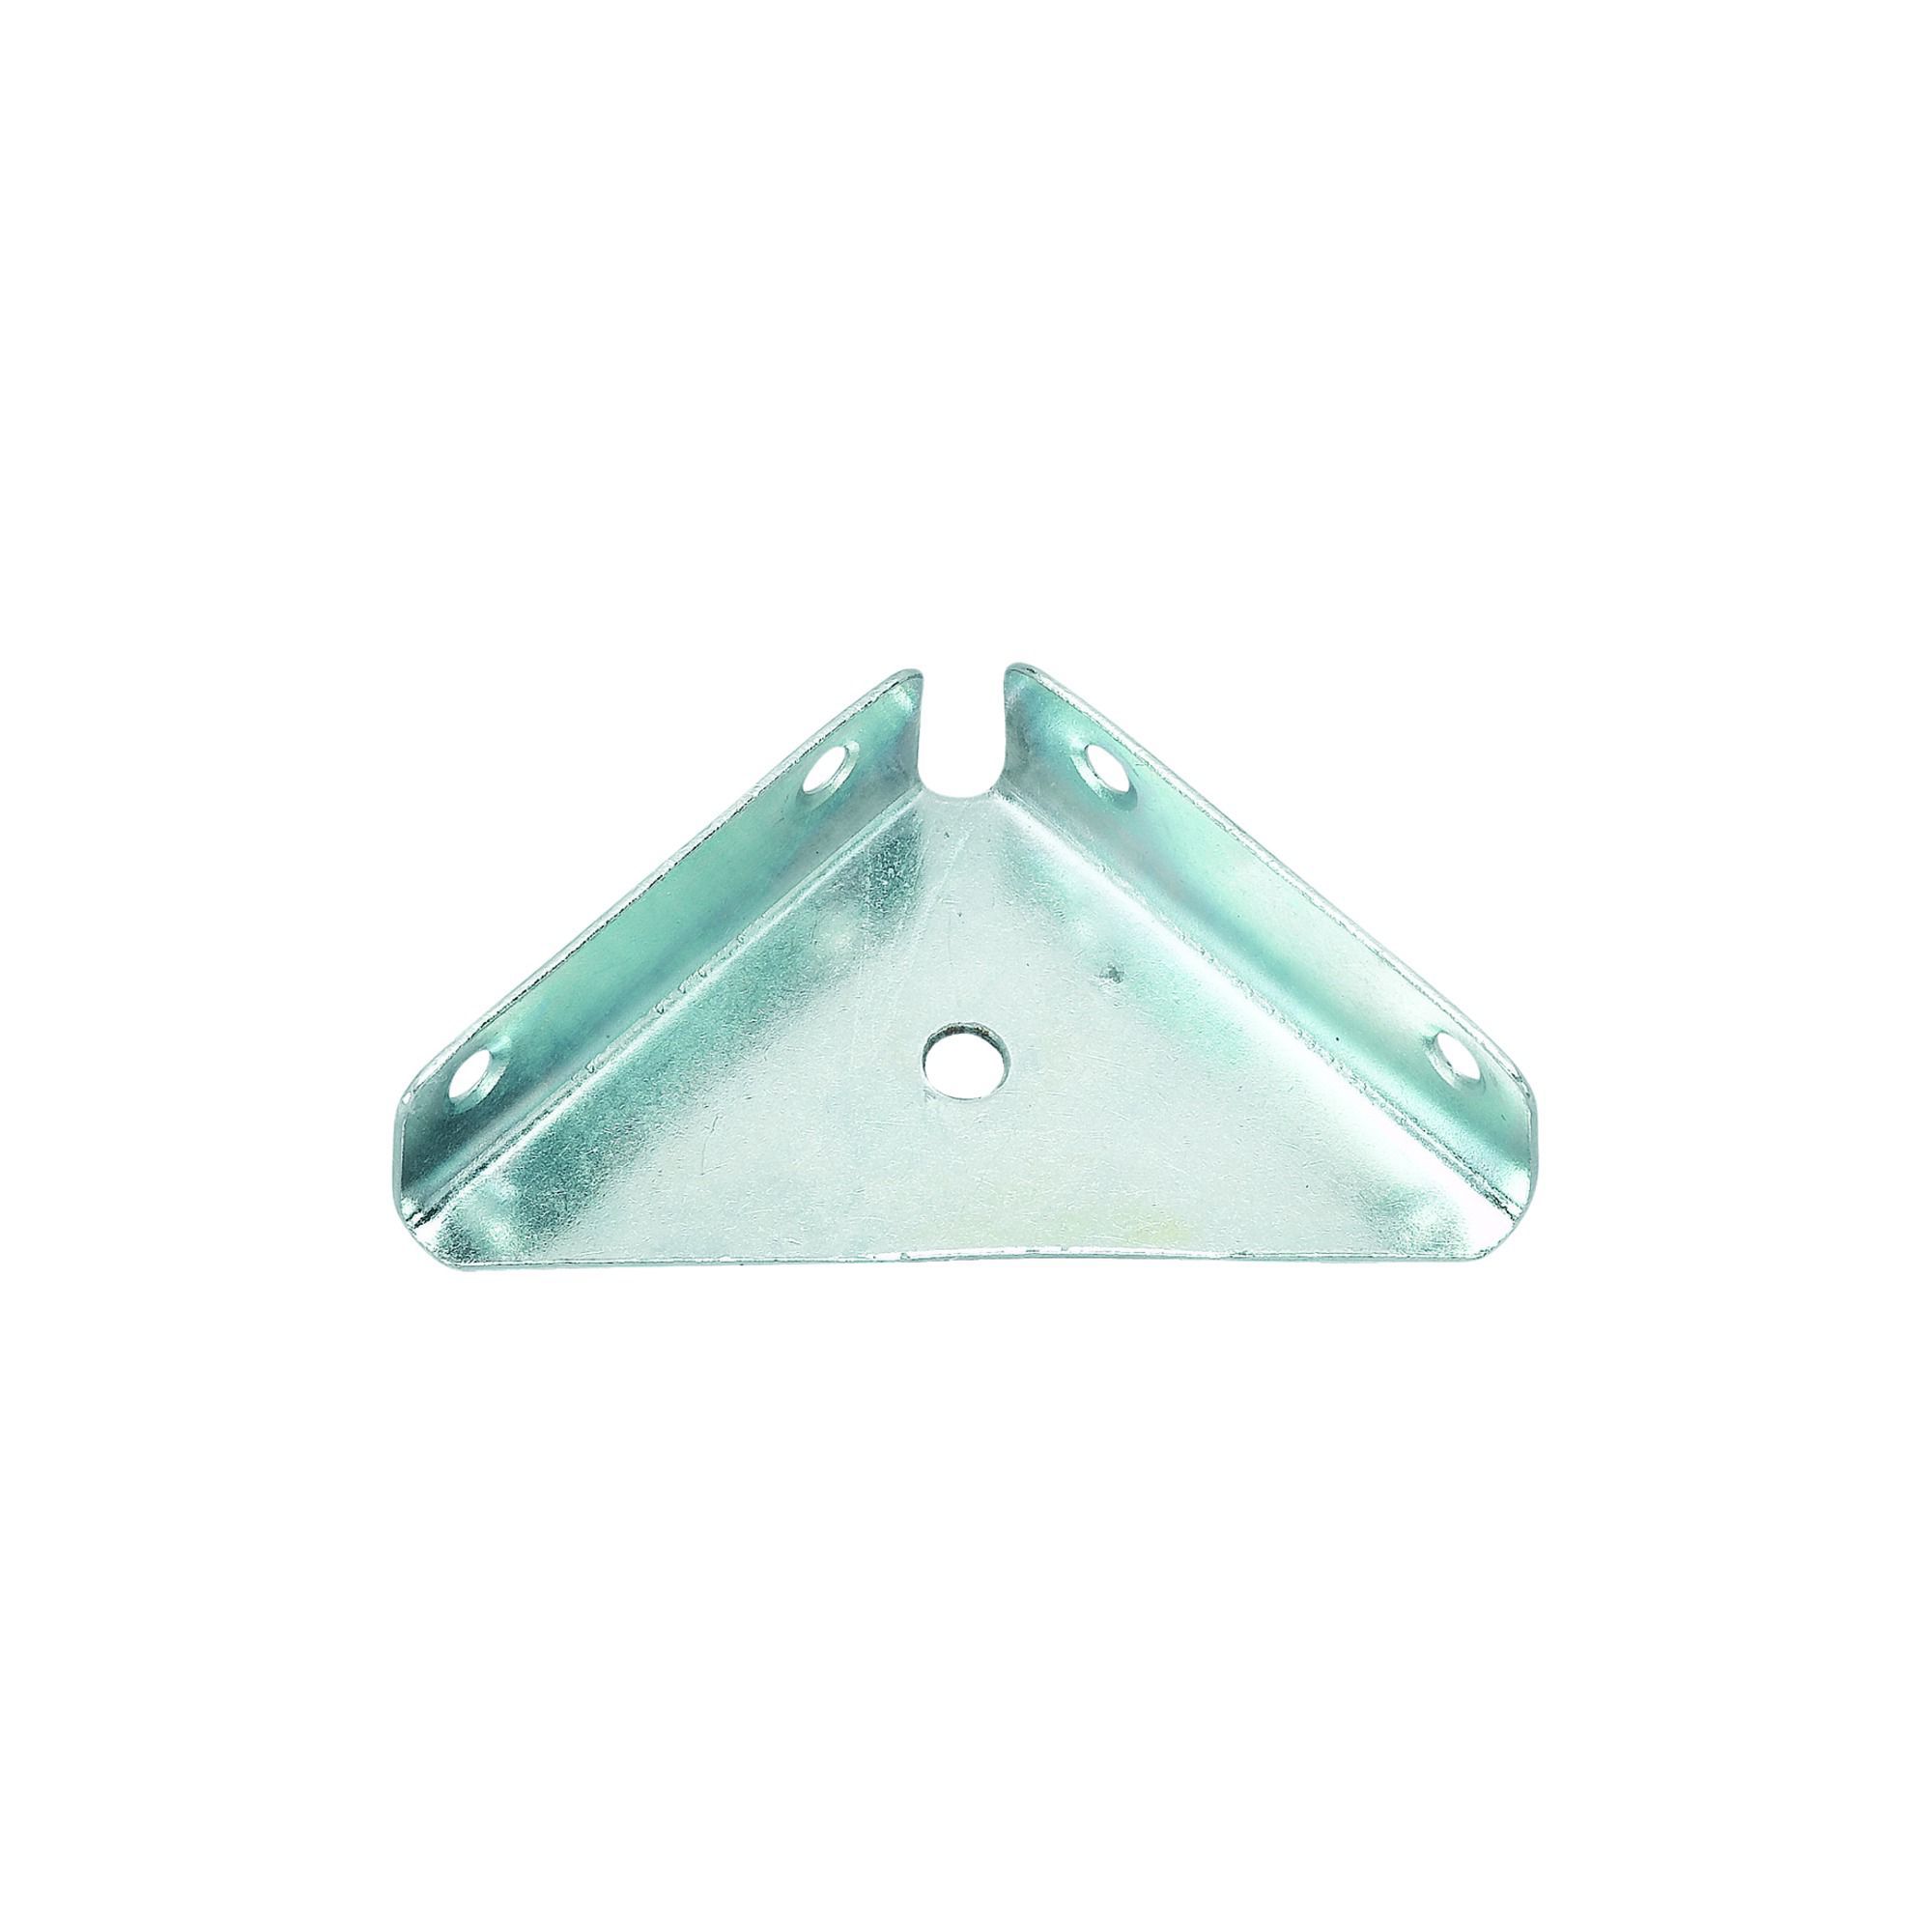 Image of Wickes 63mm Zinc Plated Flange Bracket Pack 4